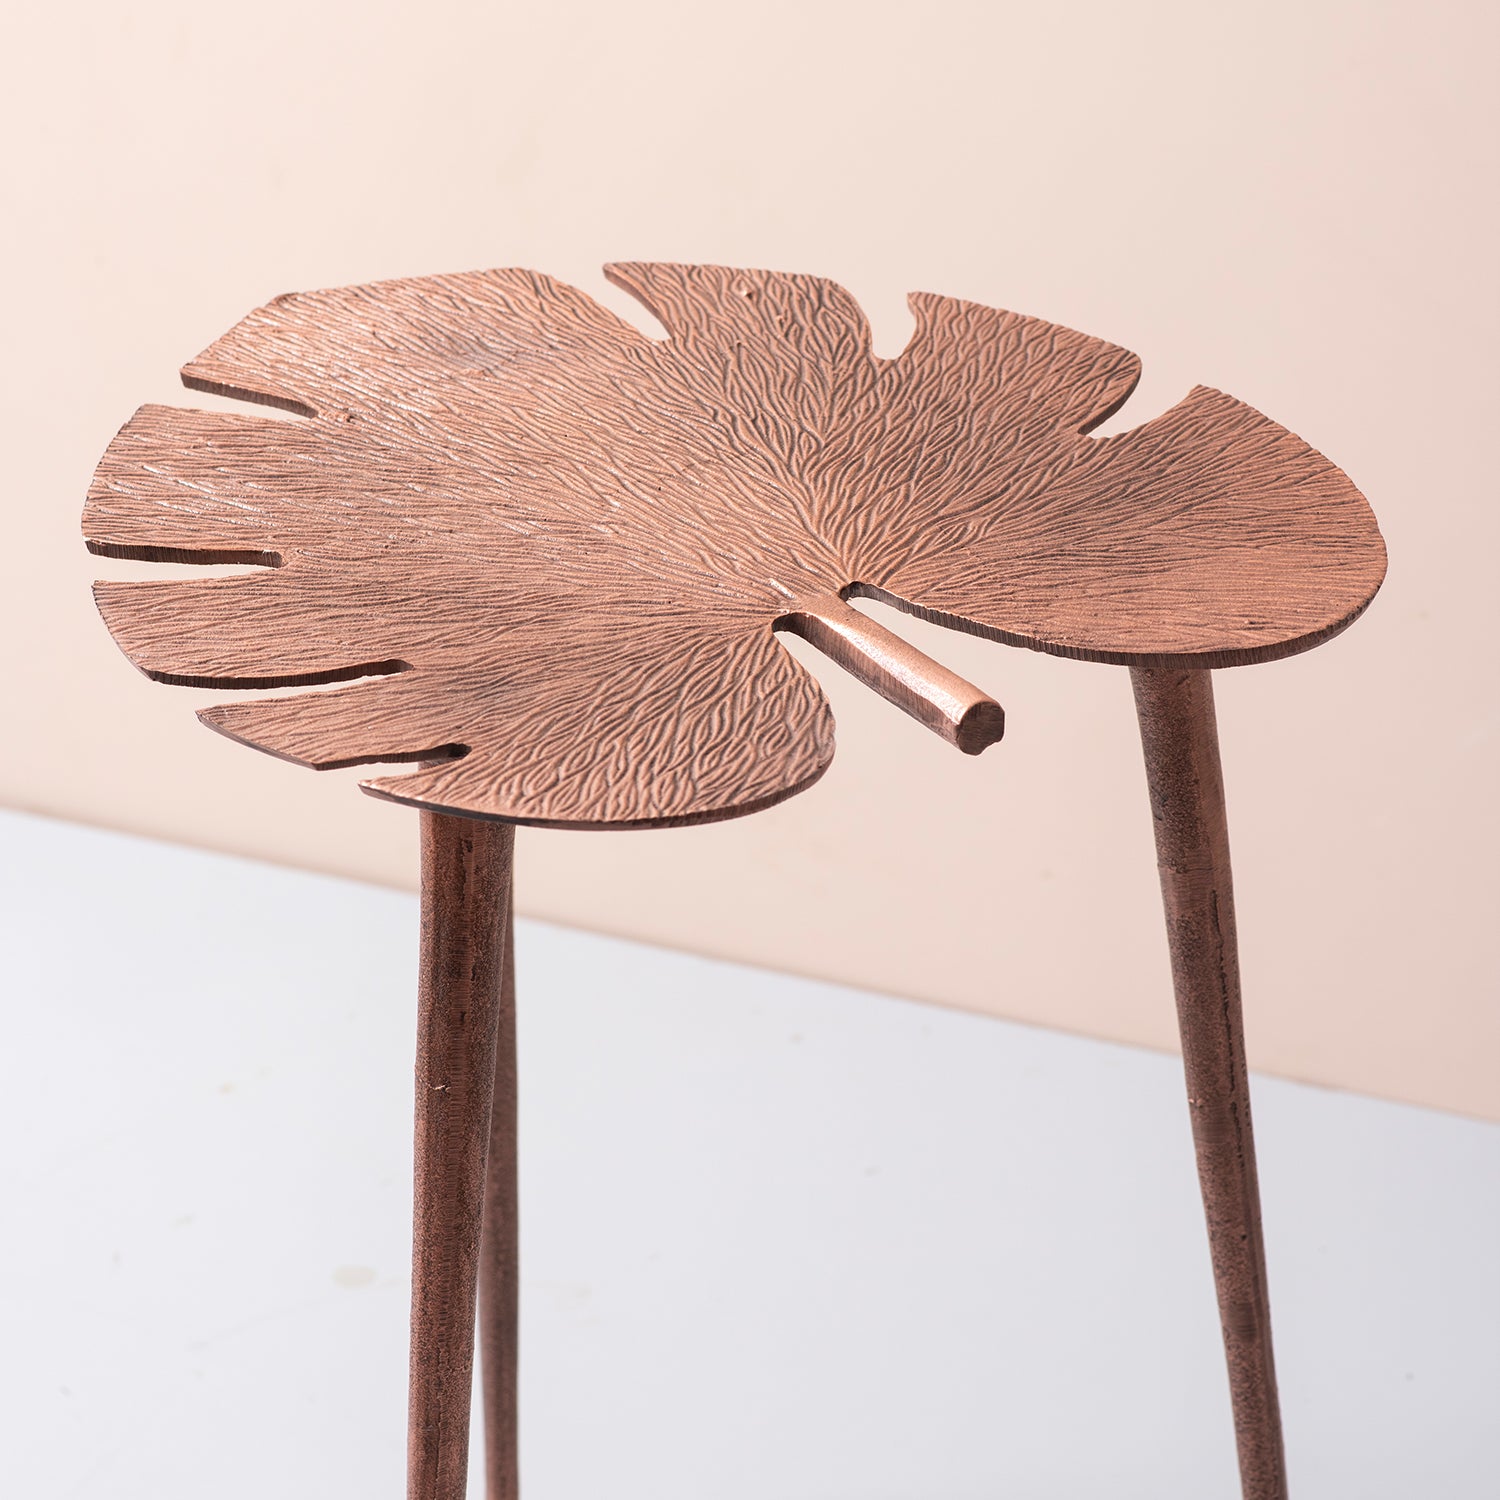 Copper Side Table 